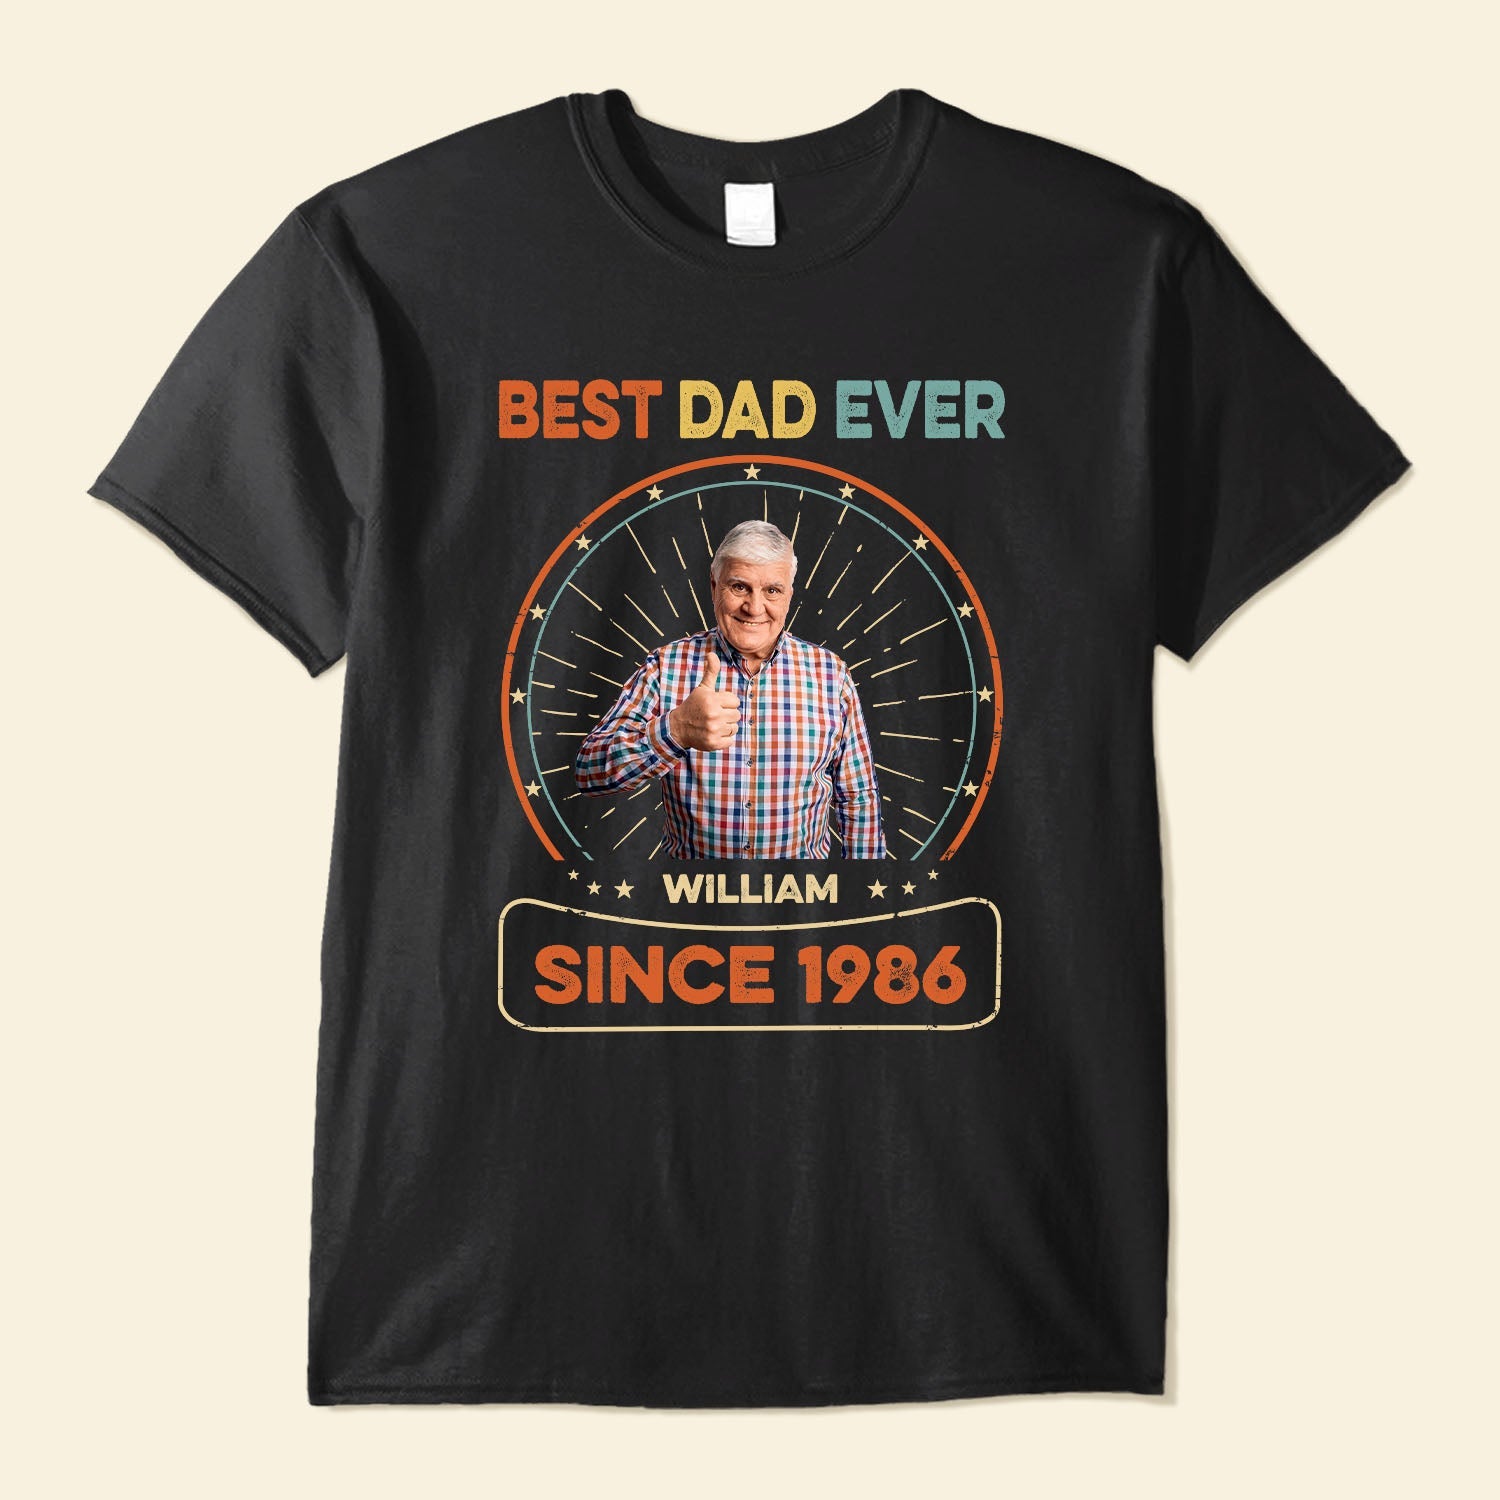 Best Dad Ever - Personalized T-shirt, Father's Day Gift for Dad